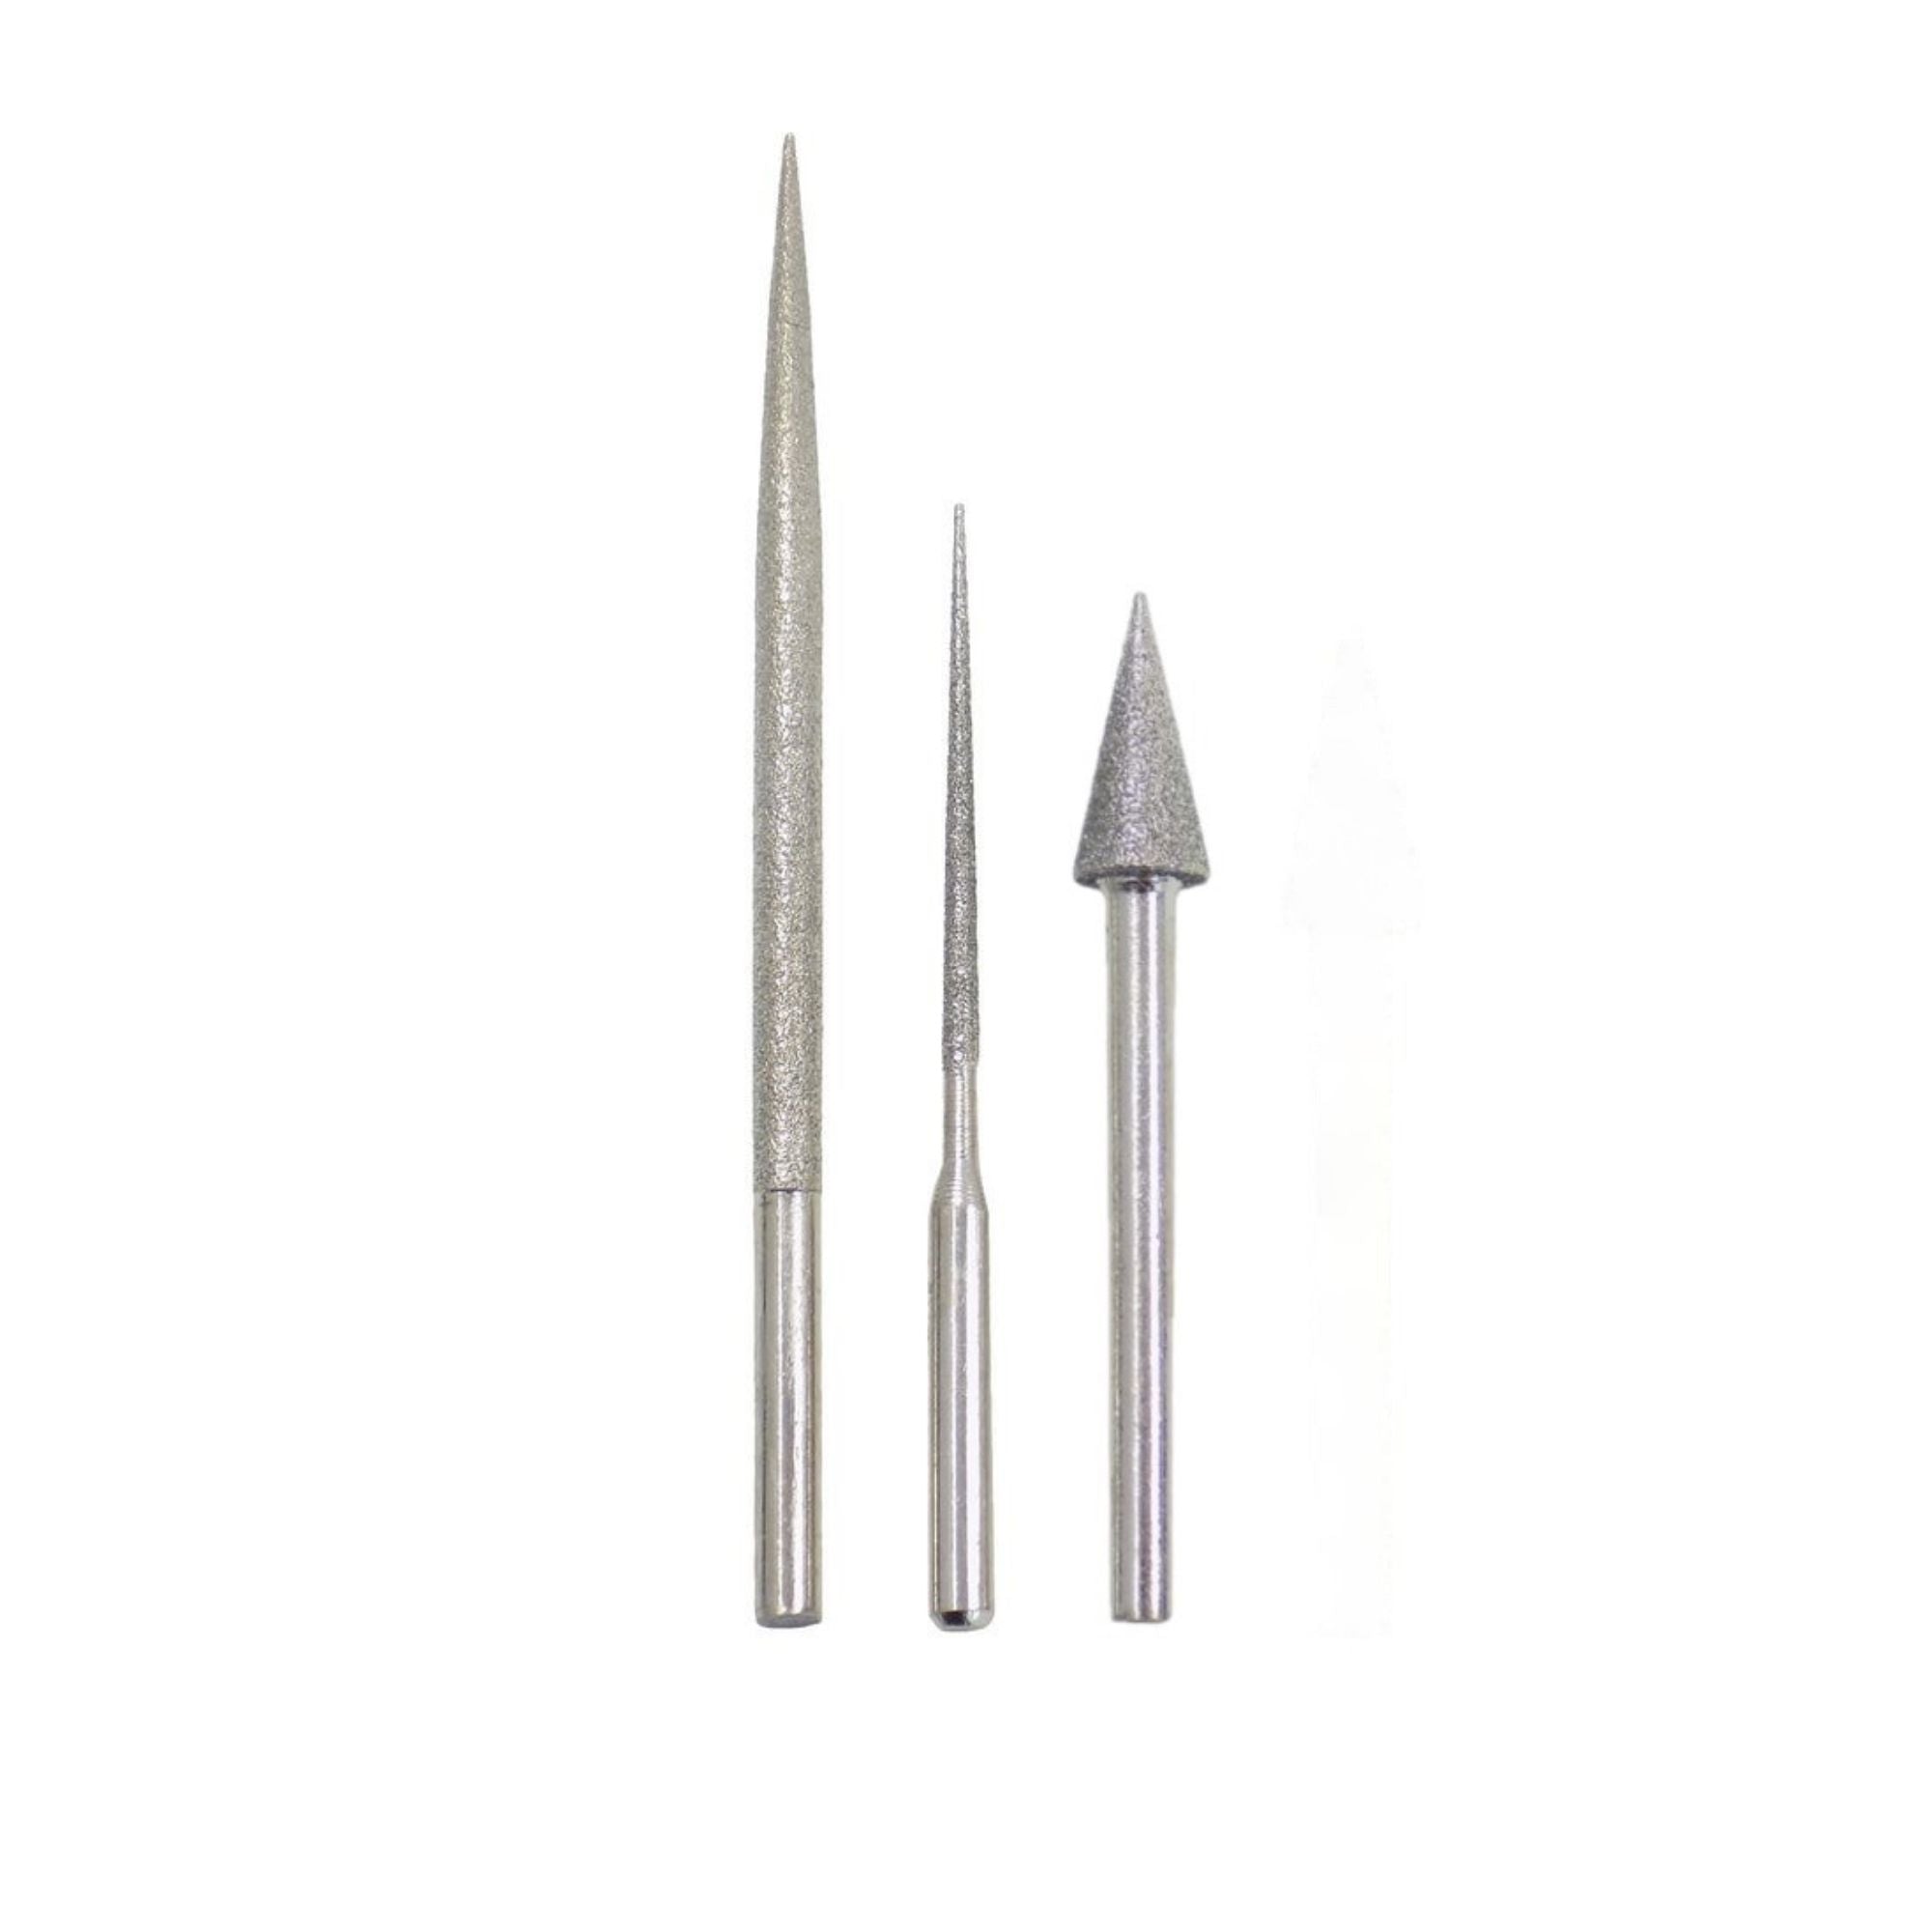 Electric Bead Reamer with 3 Diamond Shaped Tips, Variable Speed Control 24V BeadSmith Reamer Set, Ideal for Hobby Jewelry, Crafts , Tools